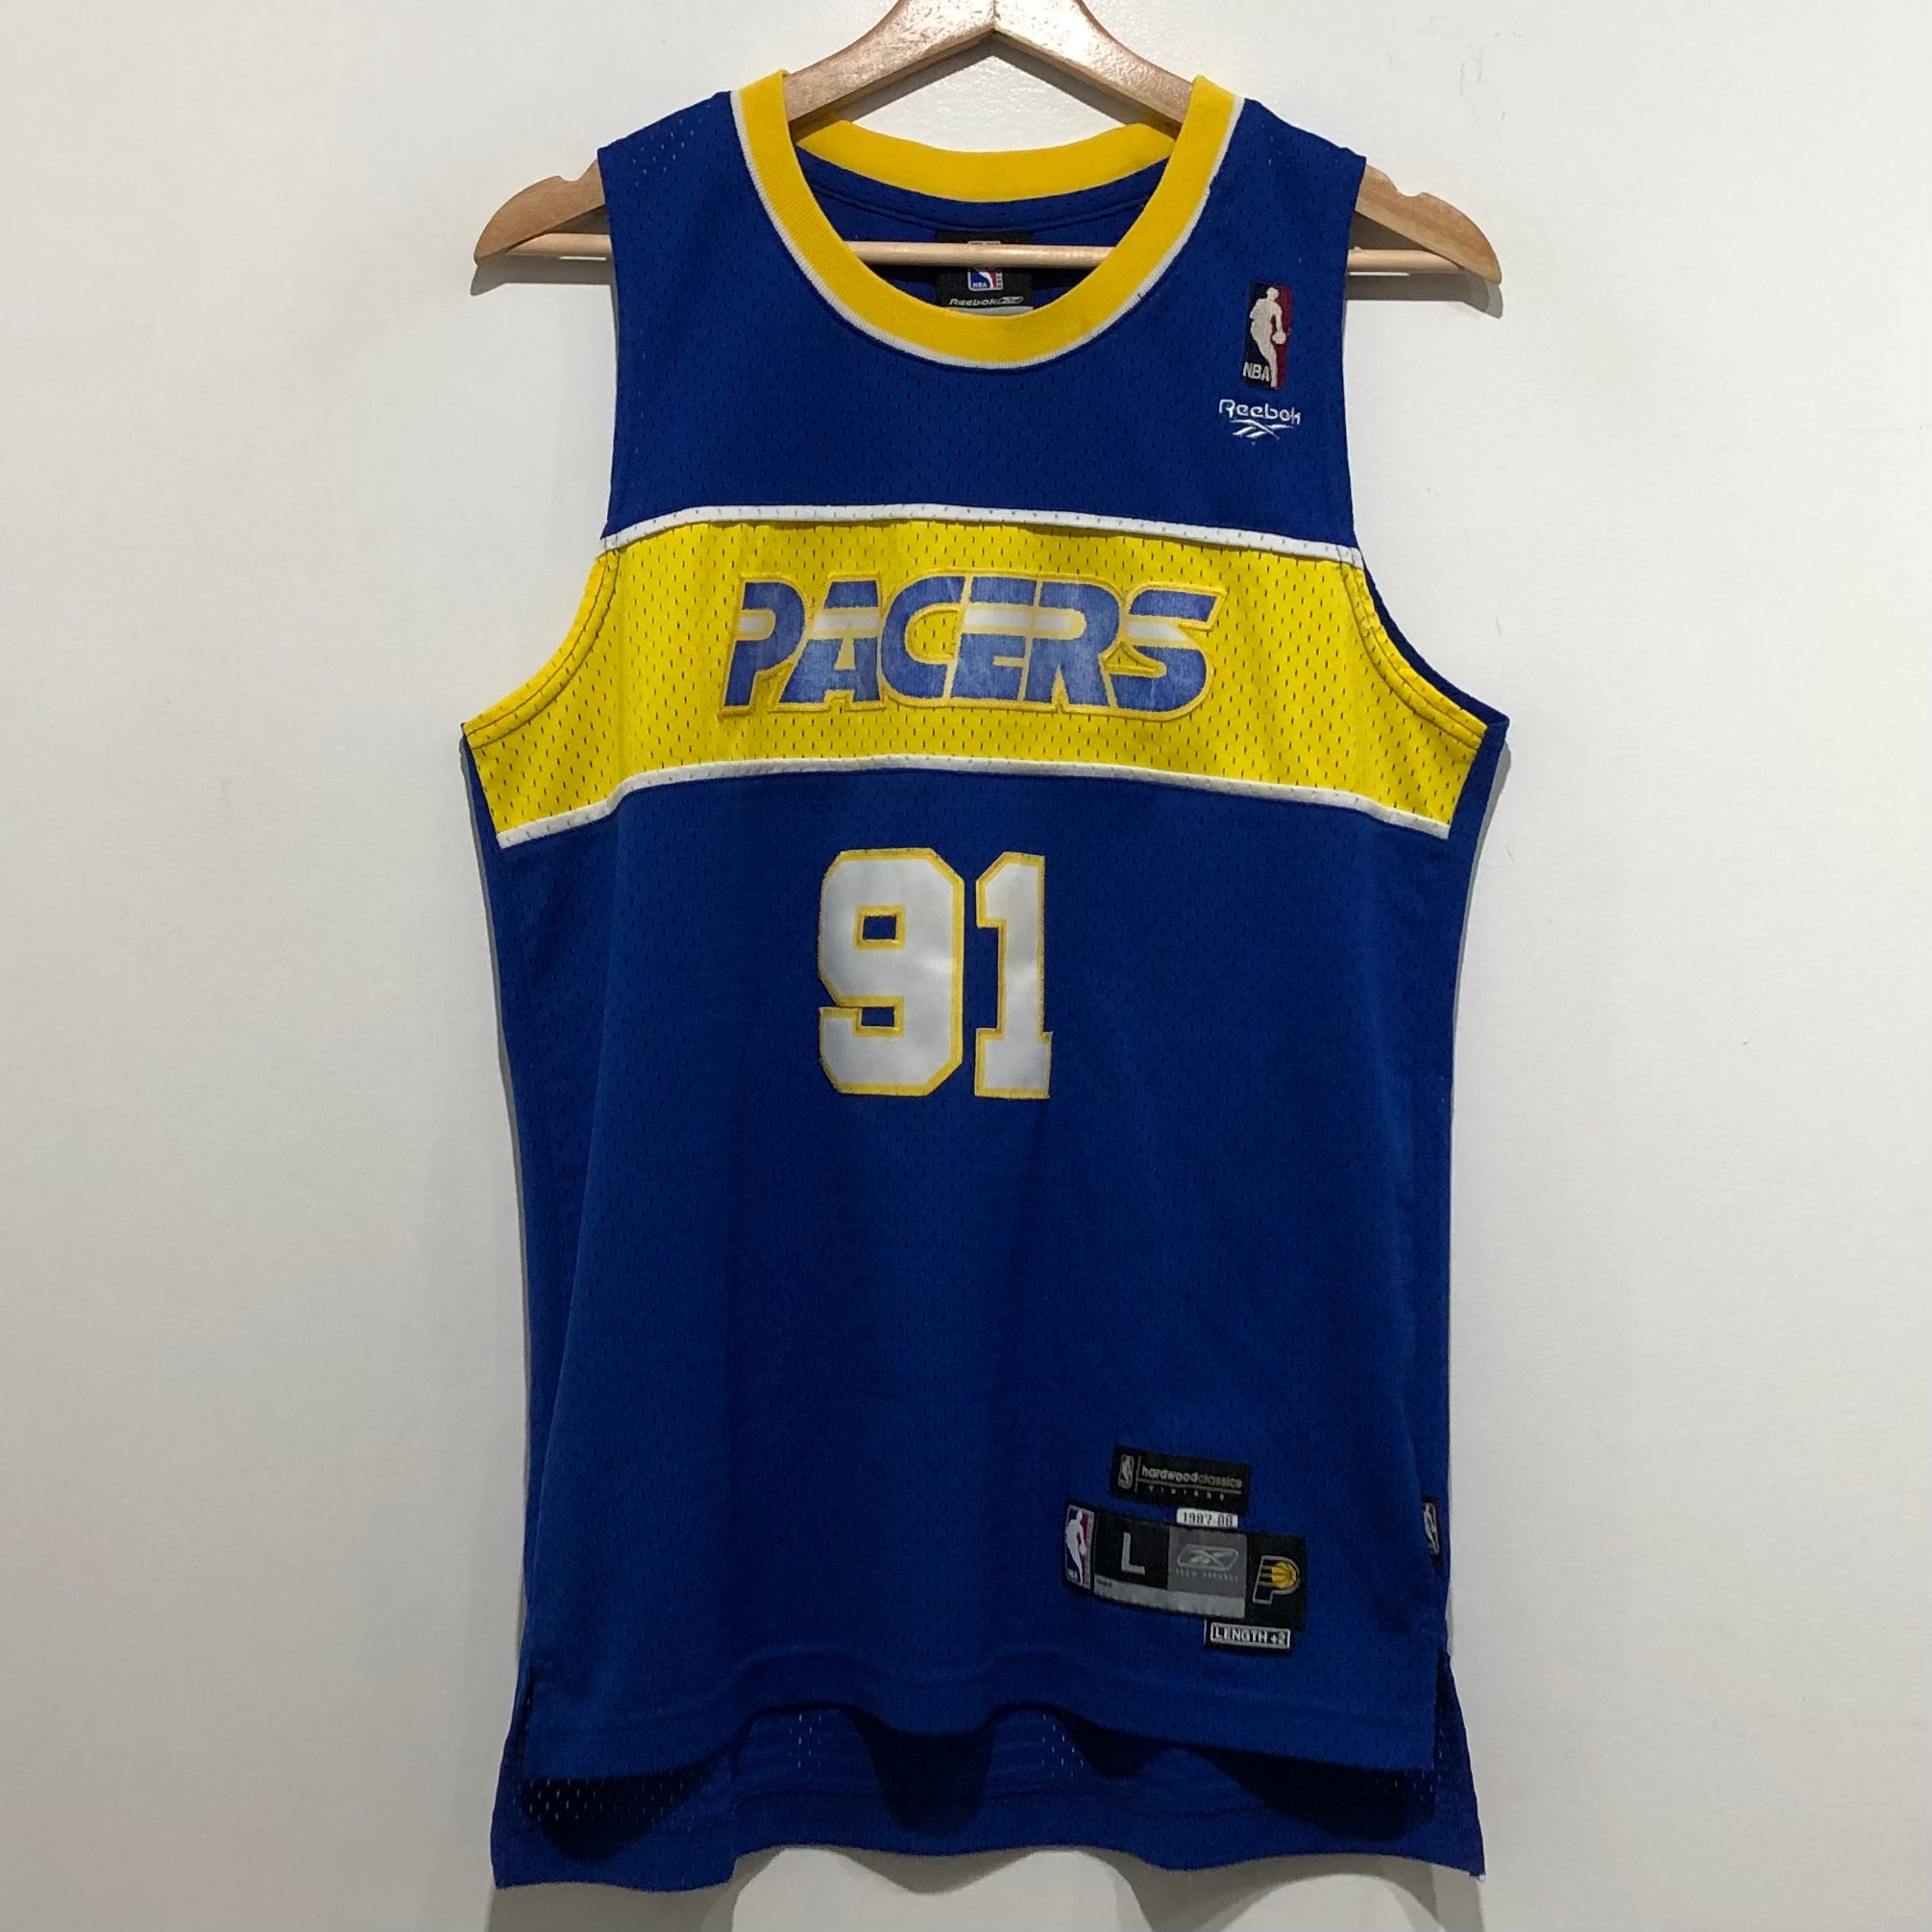 Ron Artest Indiana Pacers Jersey Youth L